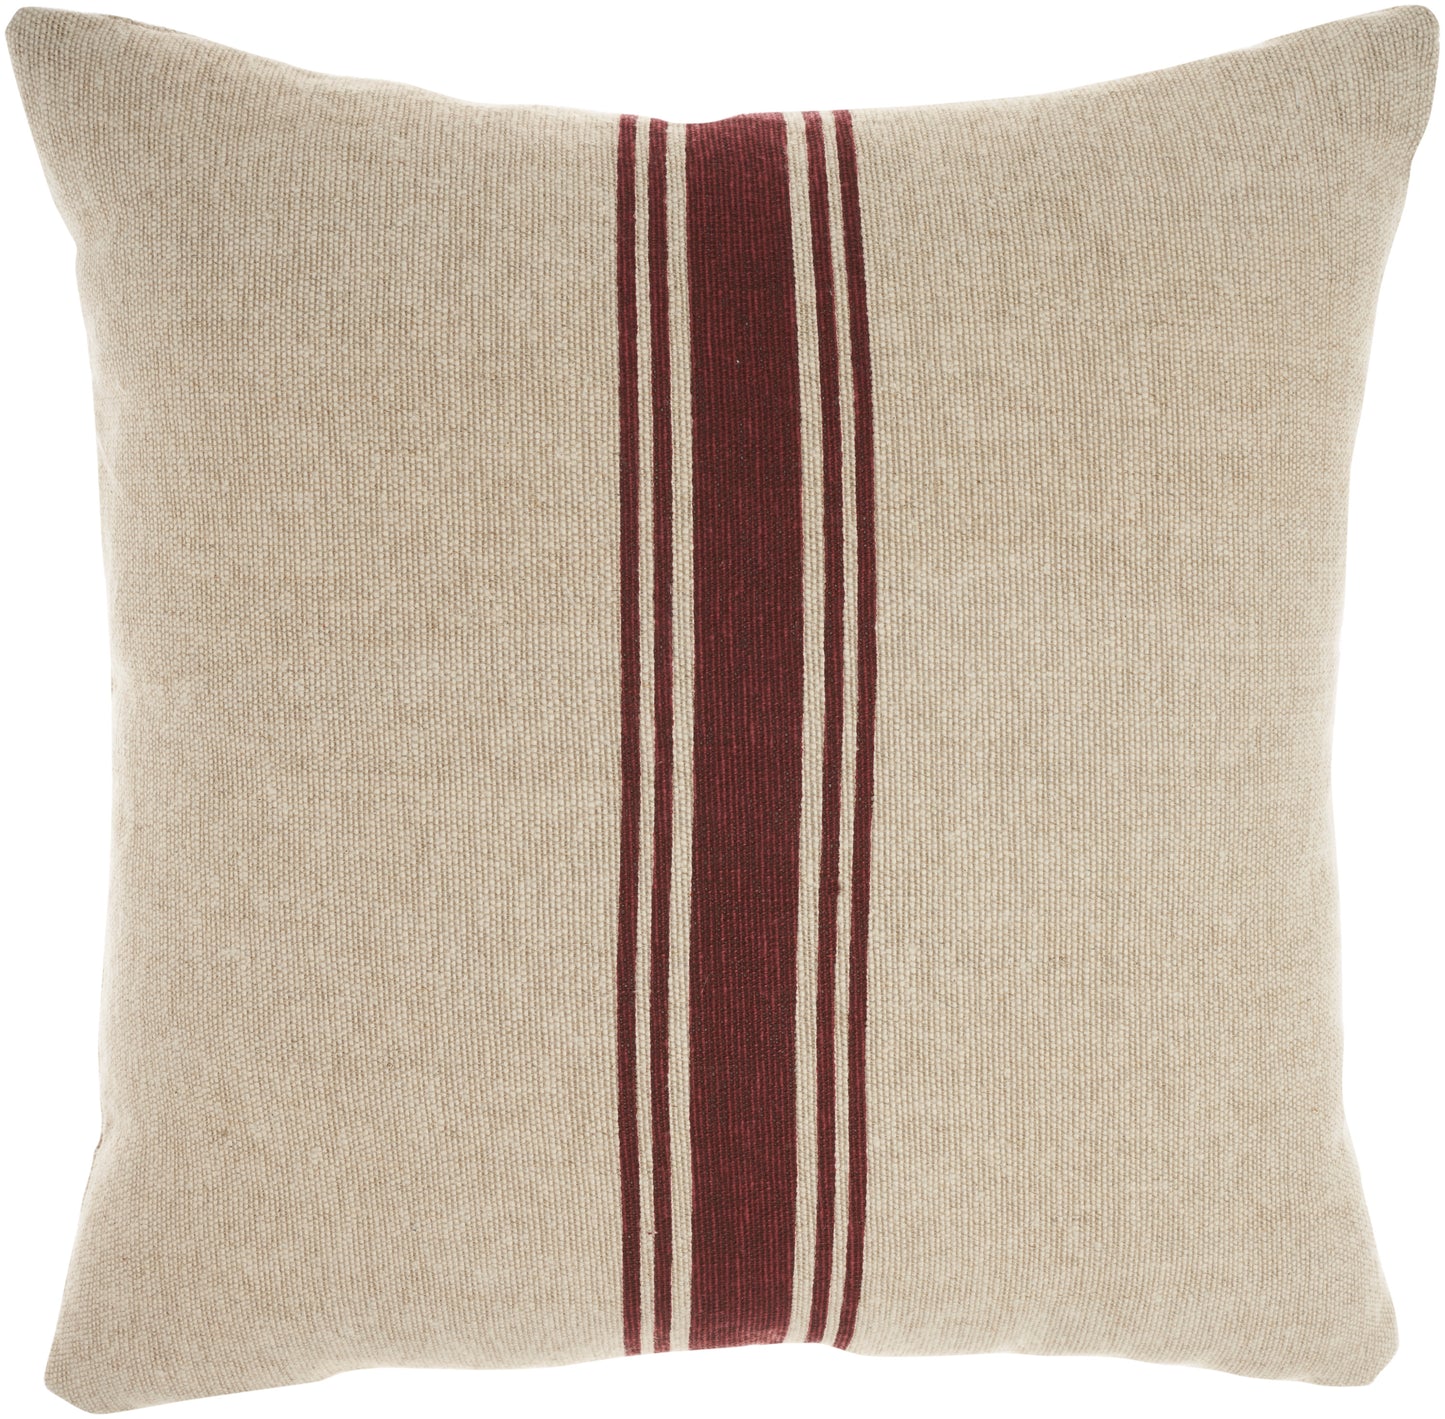 Life Styles VJ241 Cotton Linen Stripe Throw Pillow From Mina Victory By Nourison Rugs